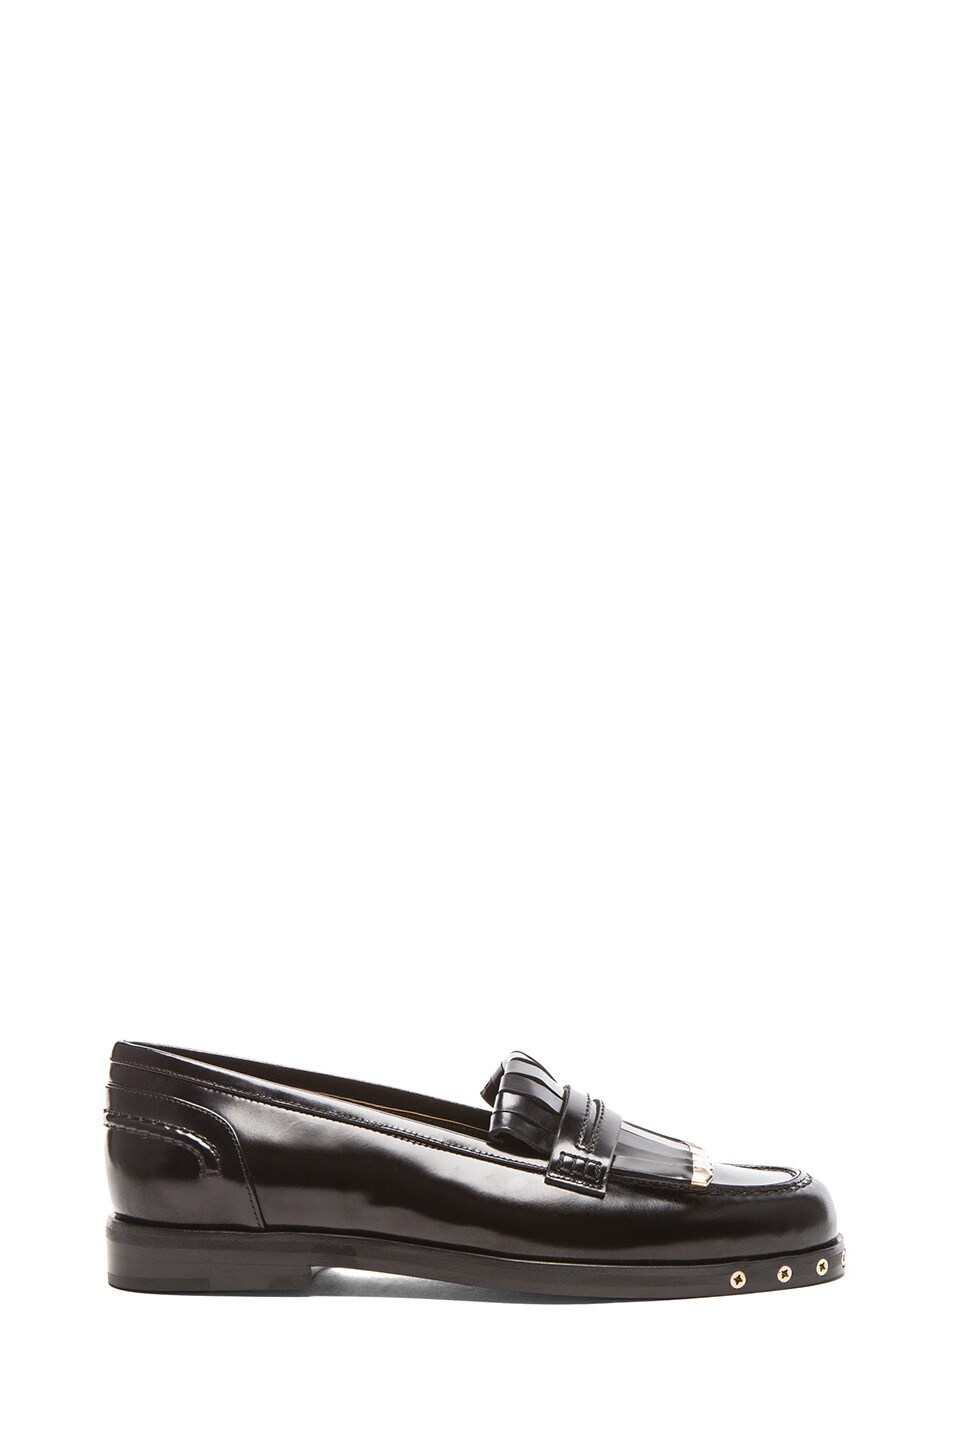 Lanvin Leather Loafers in Black | FWRD